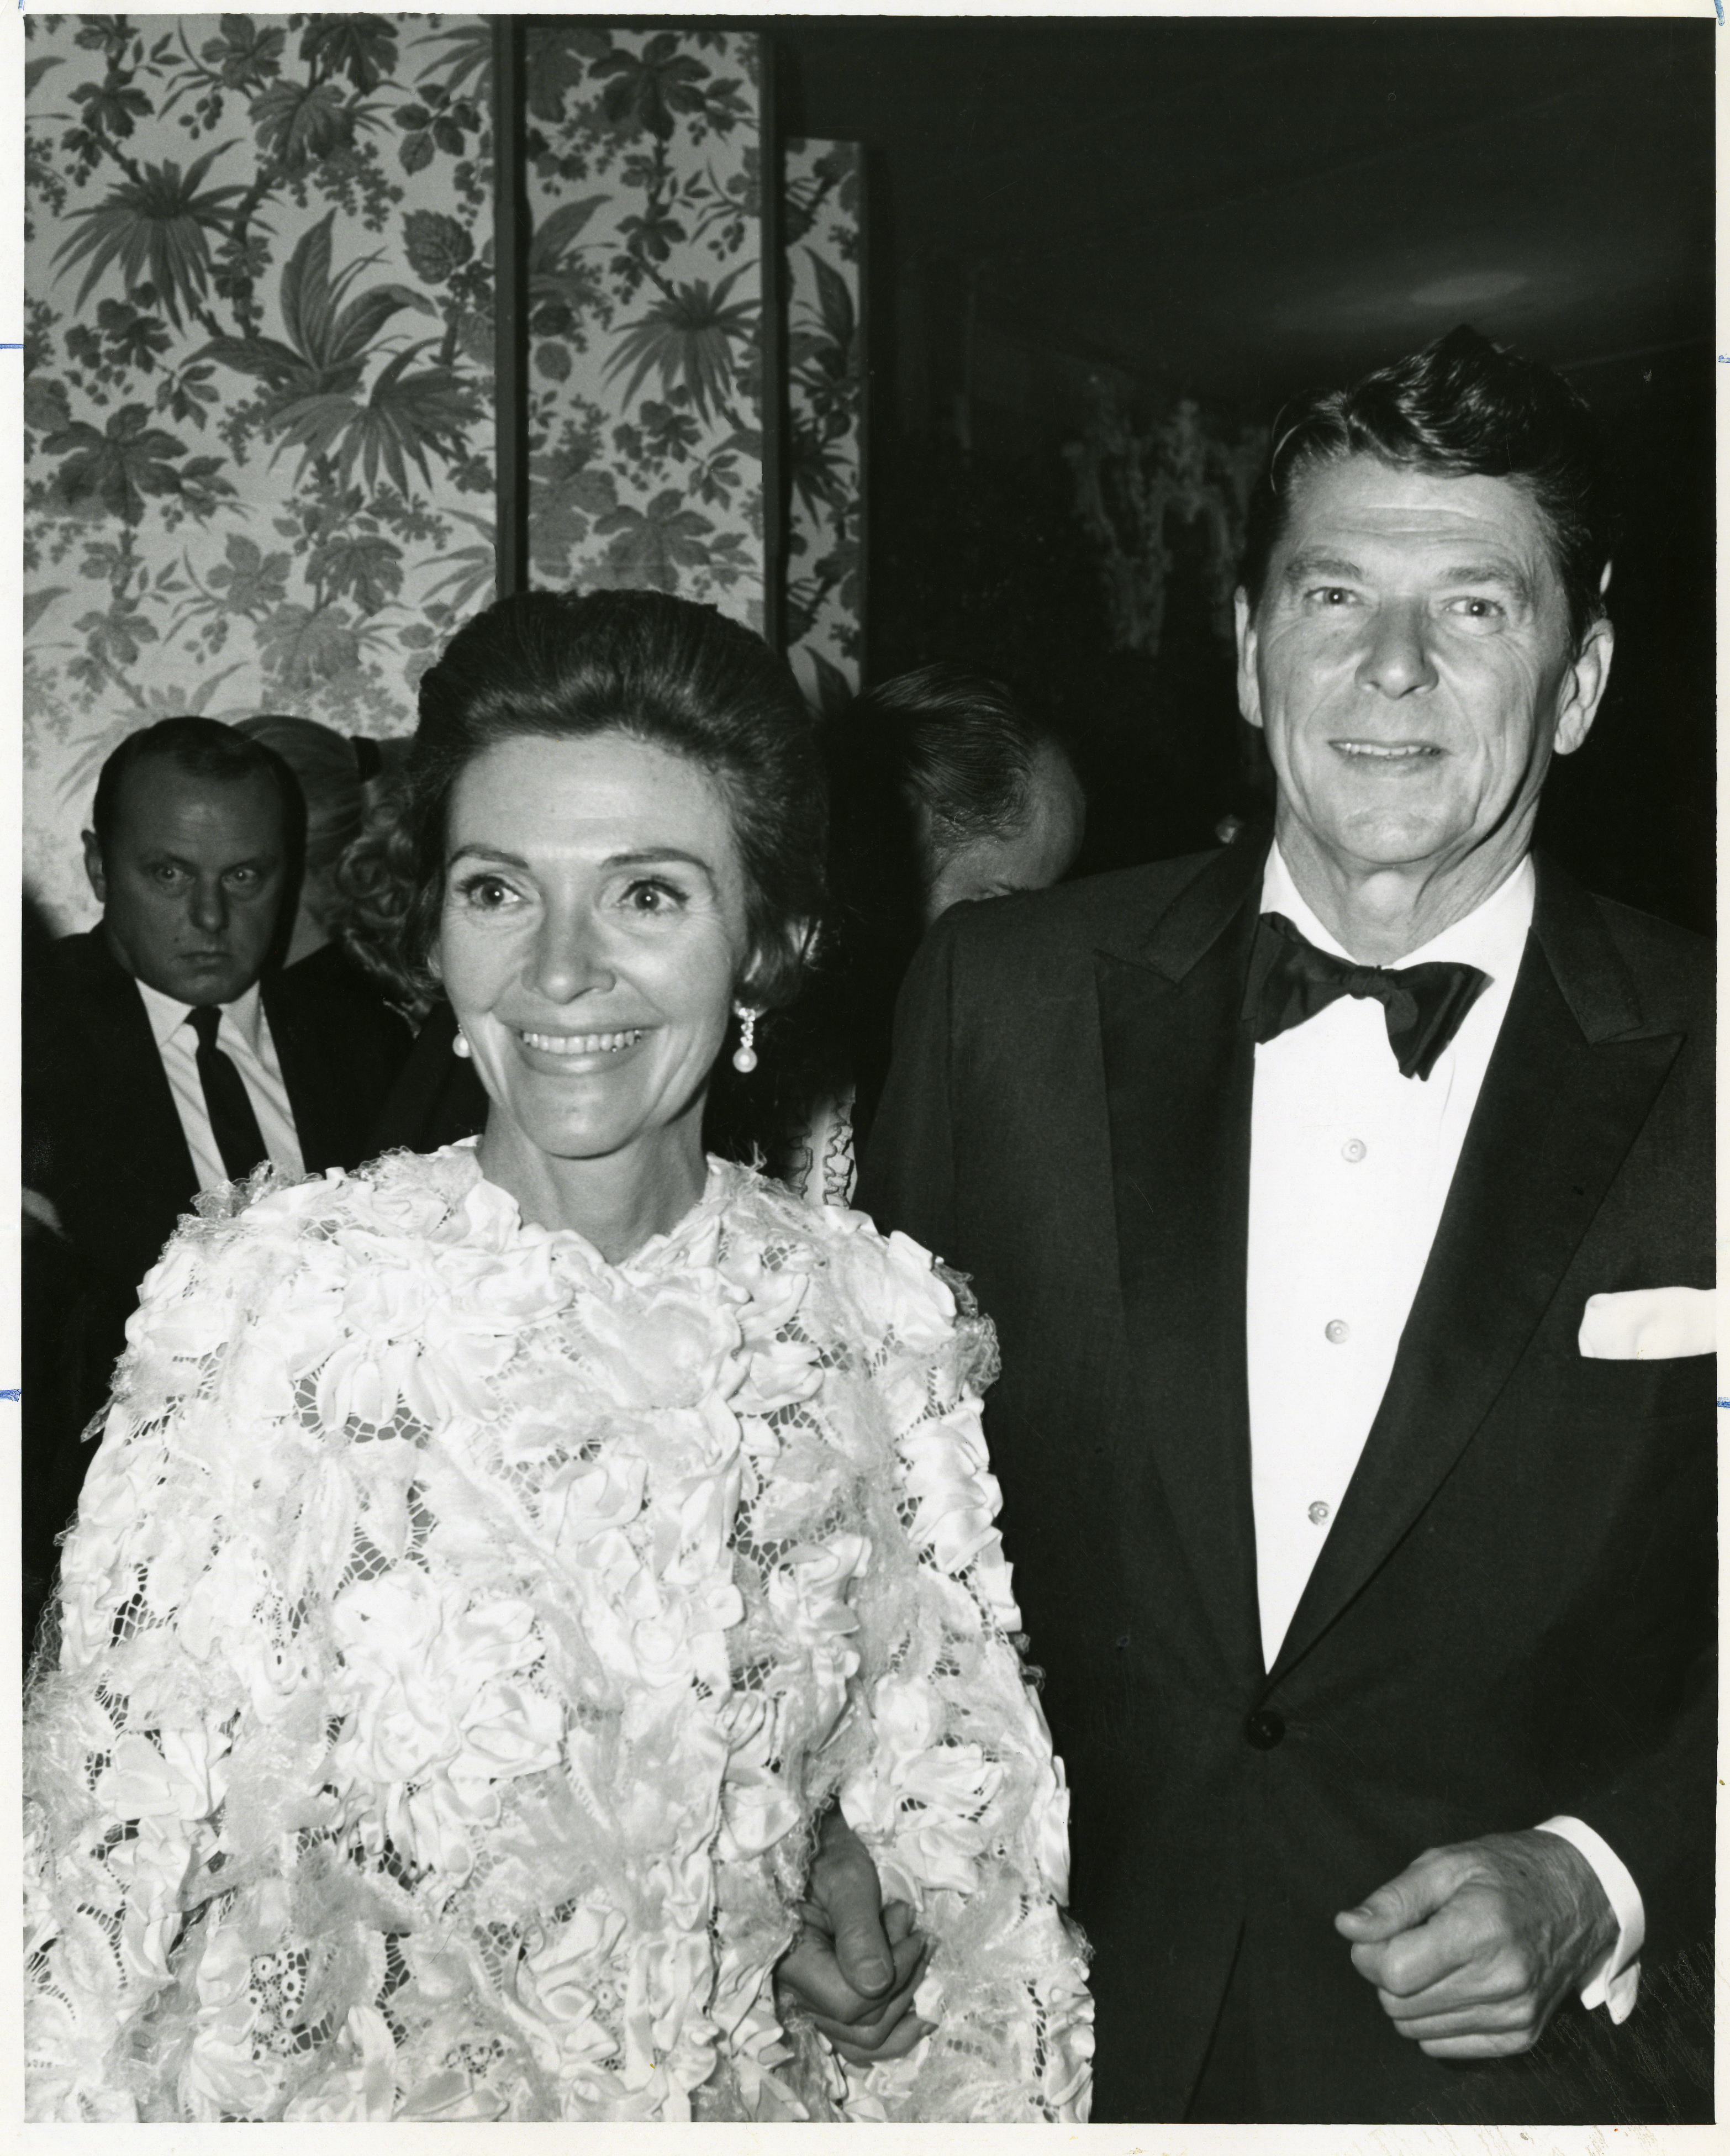 Ronald Reagan and Nancy Reagan at unknown formal event 